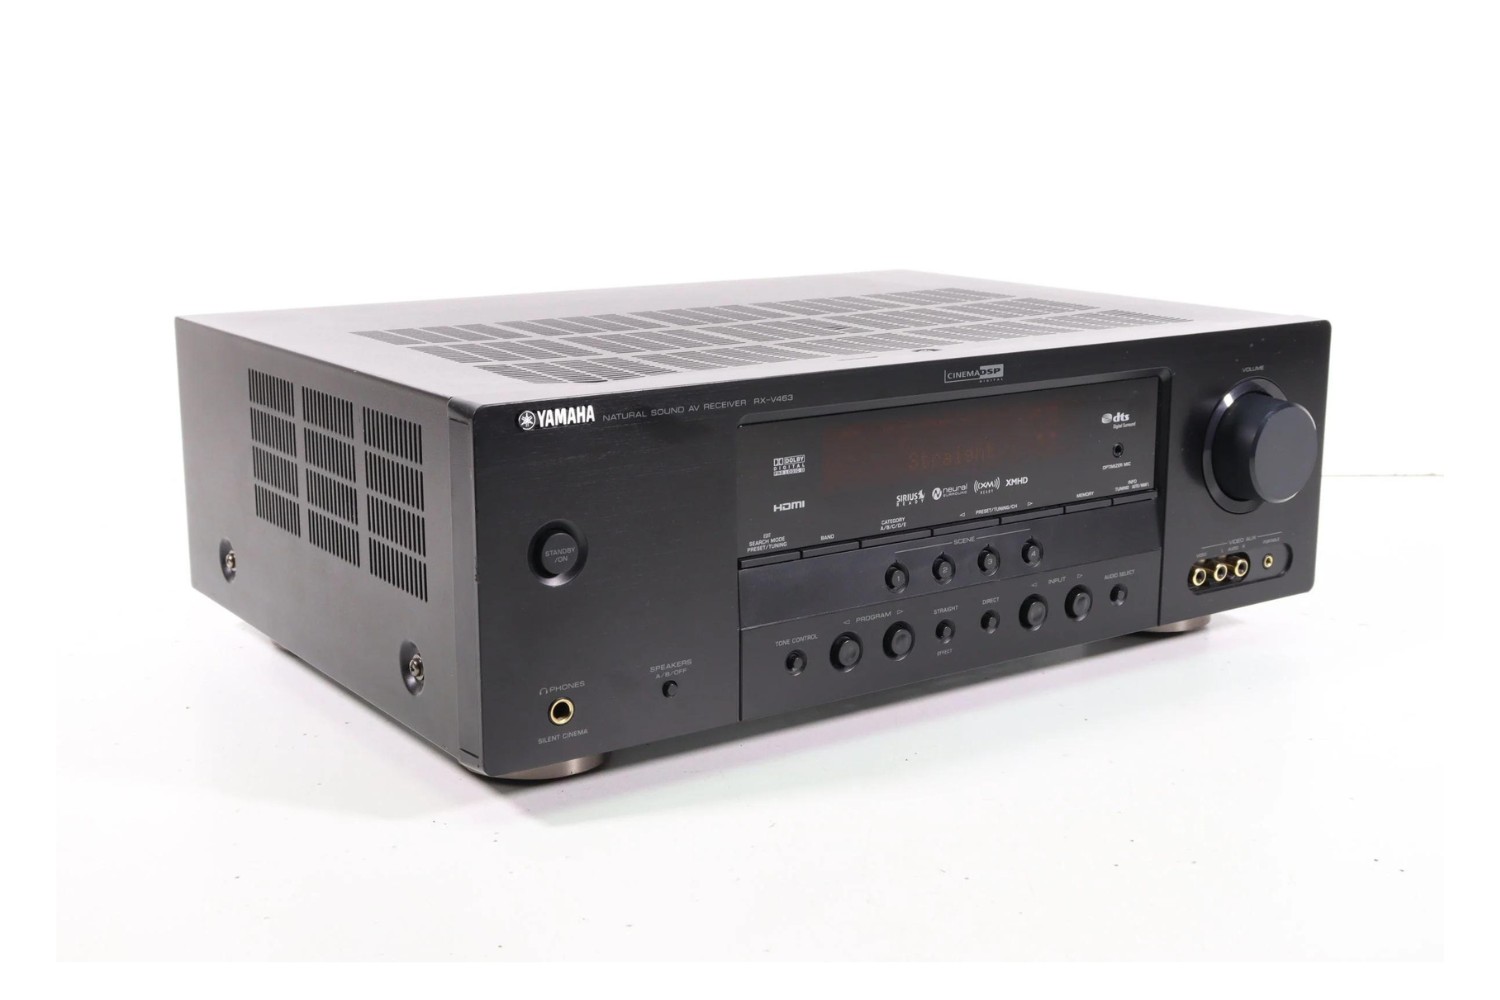 what-does-code-mi-mean-on-my-rx-v463-av-receiver